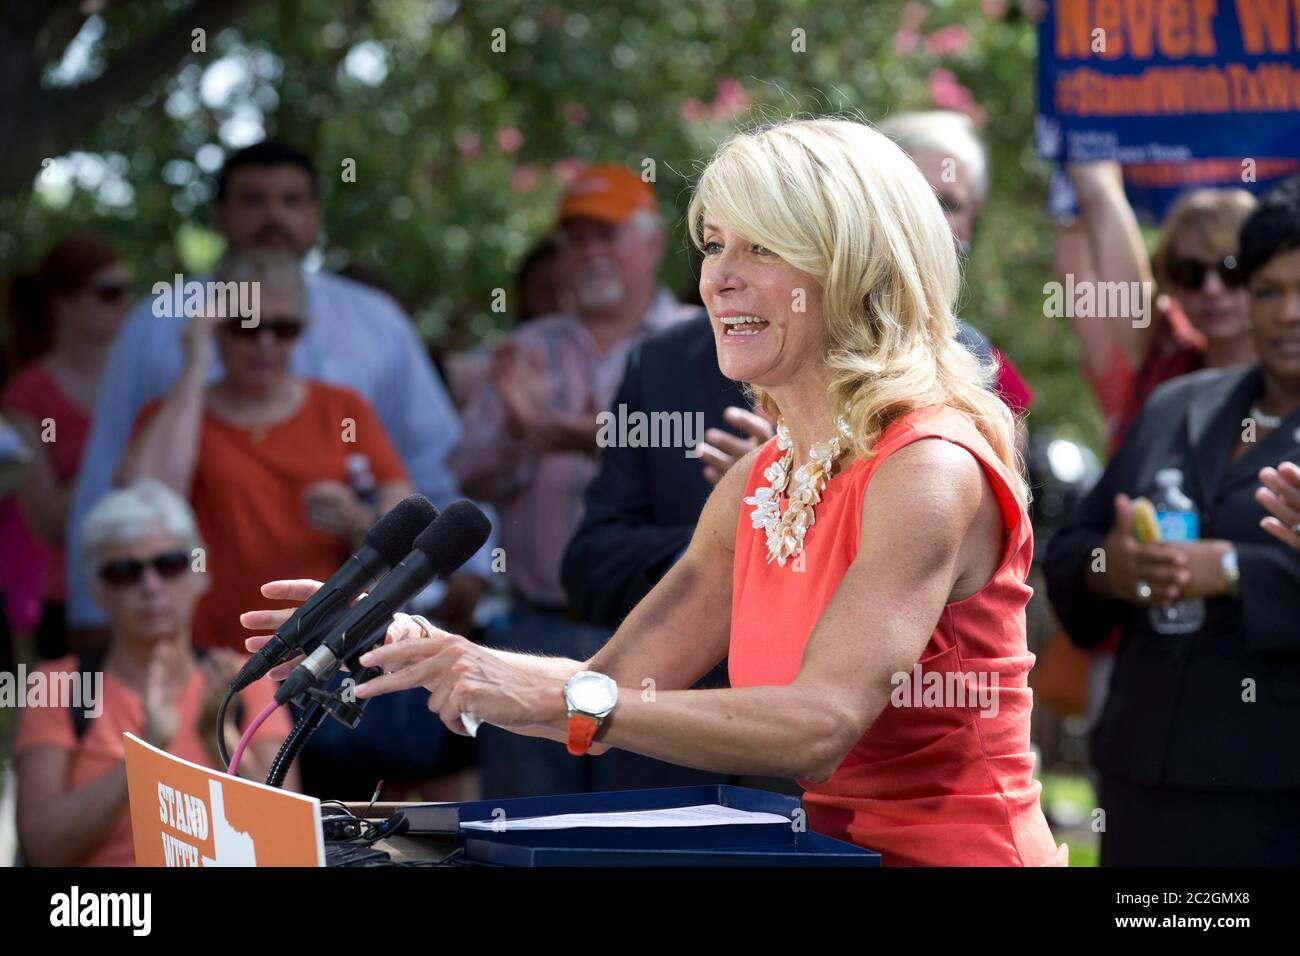 Austin Texas USA, July 2013: State Sen. Wendy Davis, D-Ft. Worth, speaks at a pro-choice rally as activists continue to descend on the Capitol while Texas lawmakers struggle to pass a bill limiting the number of abortion providers by increasing medical standards for clinics to the level of ambulatory surgical centers. Cecille Richards, president of Planned Parenthood, stands behind Davis wearing a red dress. ©Bob Daemmrich Stock Photo